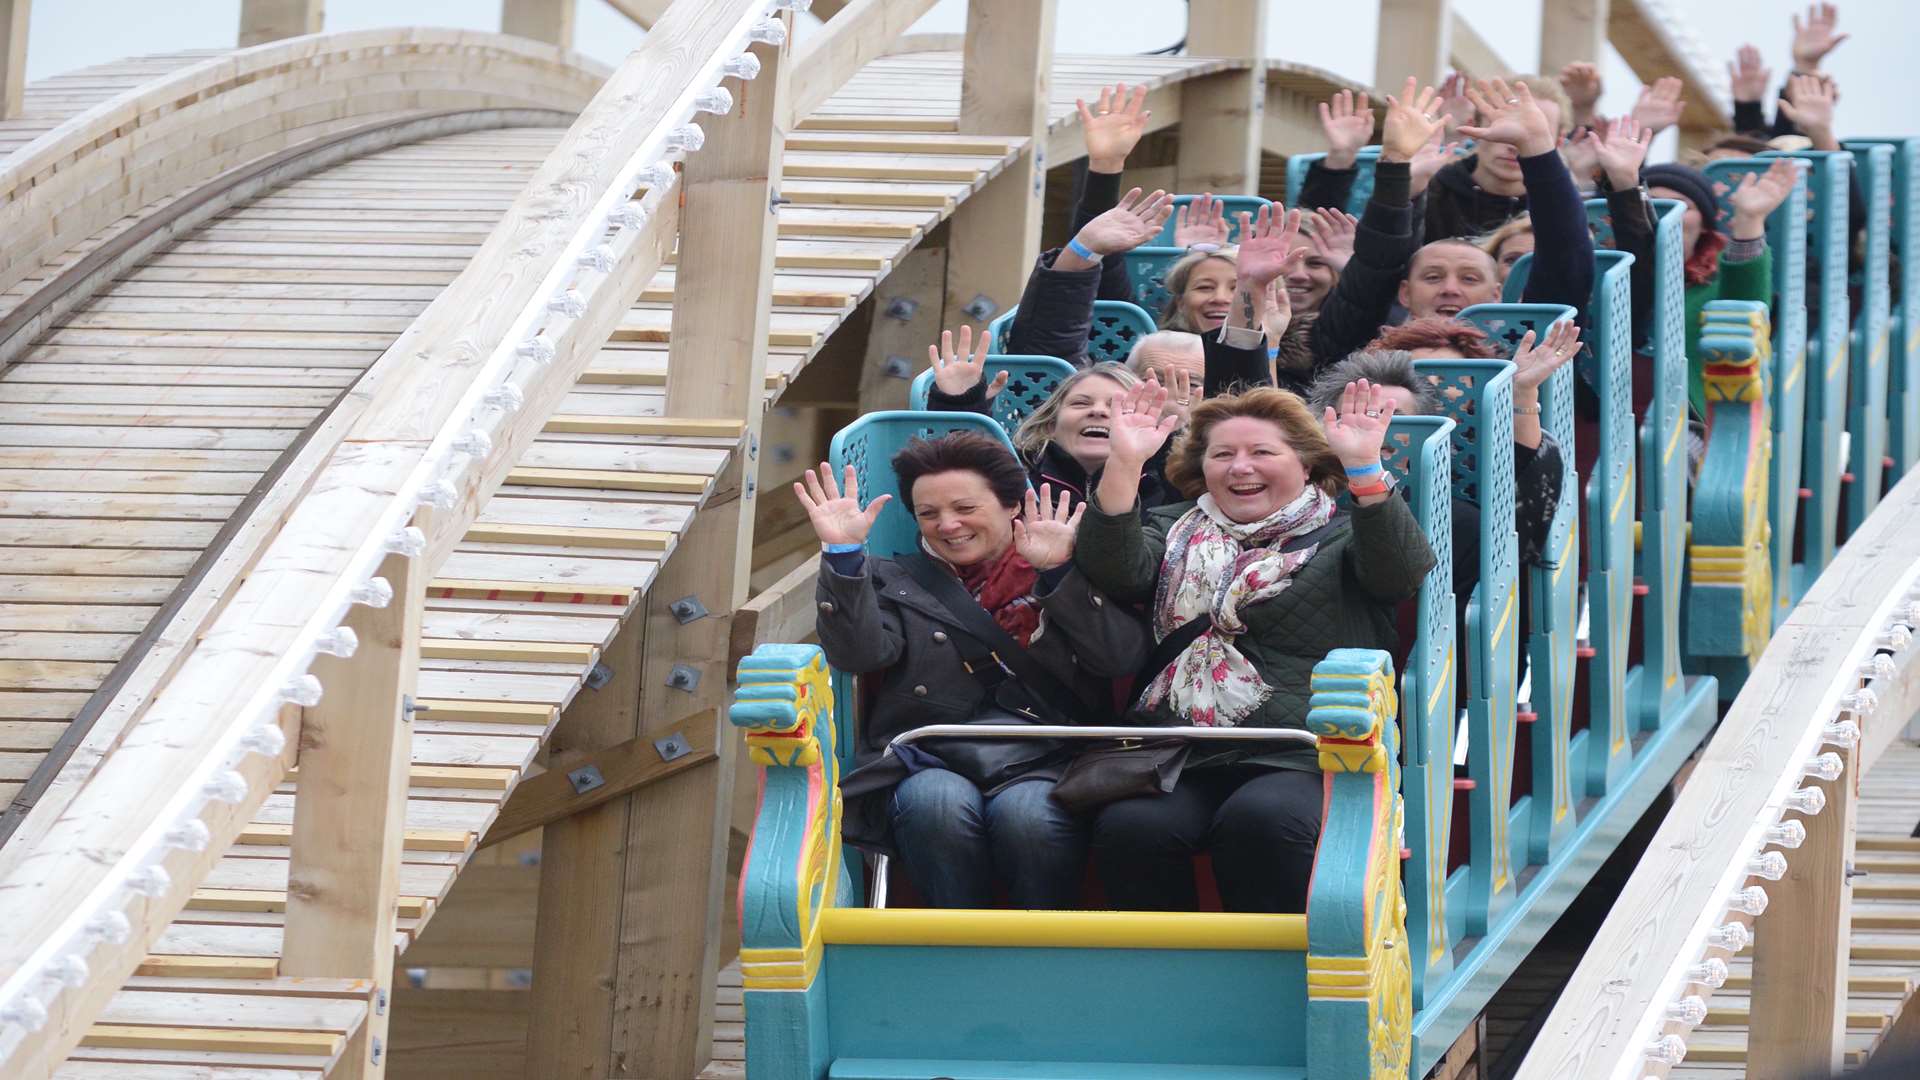 Dreamland is looking for seasonal staff to fill 195 jobs